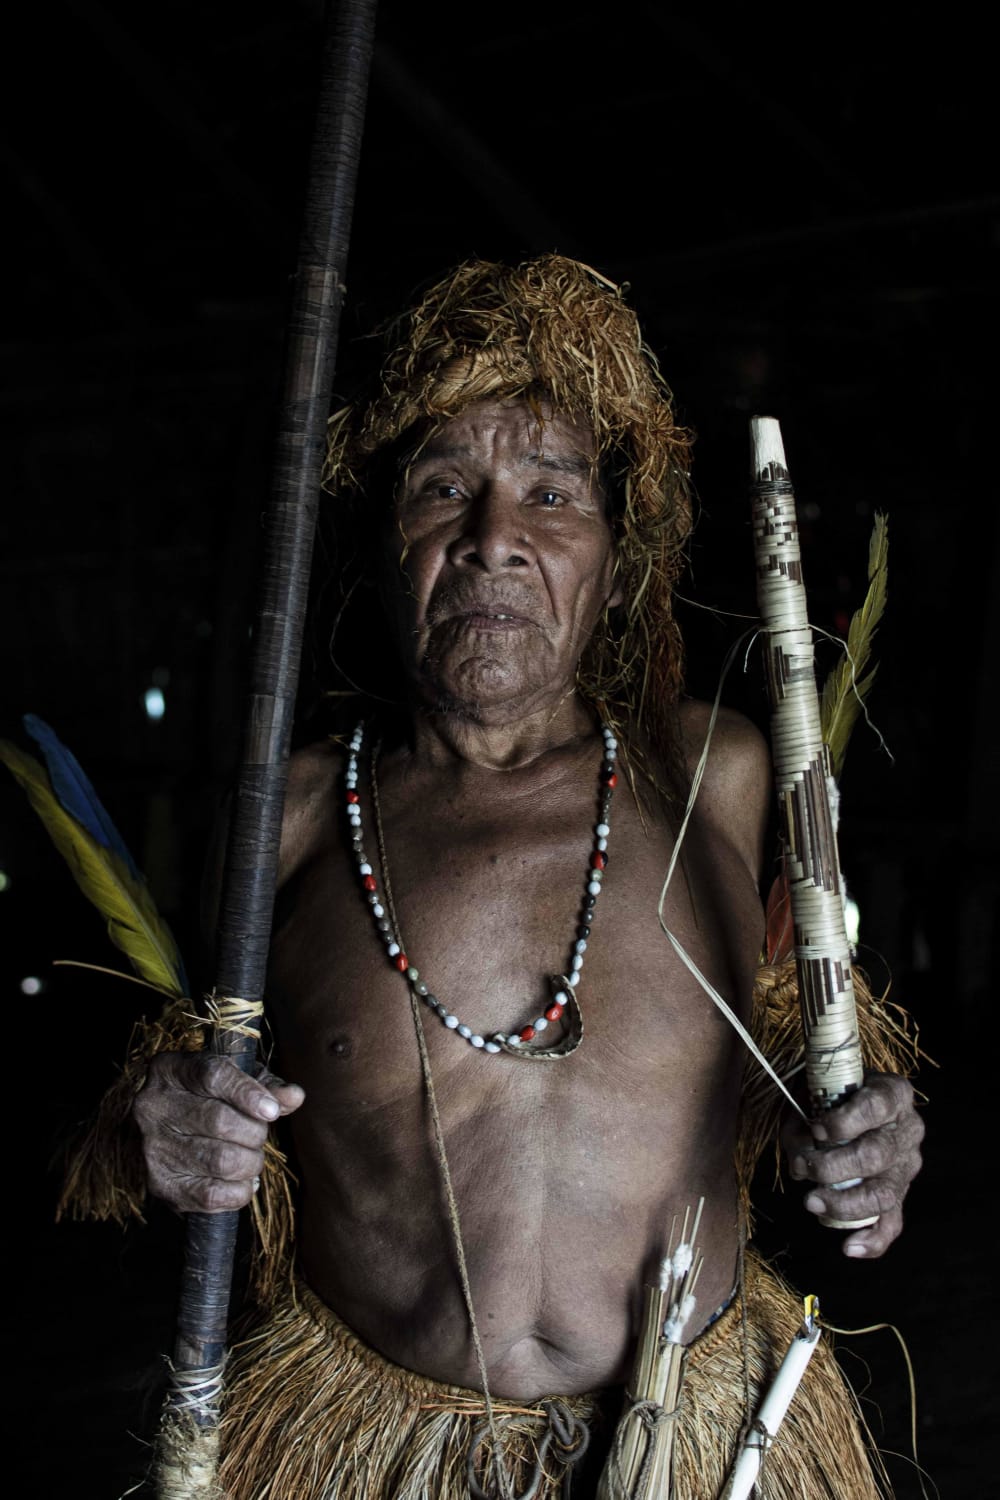 Chieftain of the Yagua indigenous people, taken in the Peruvian Amazon